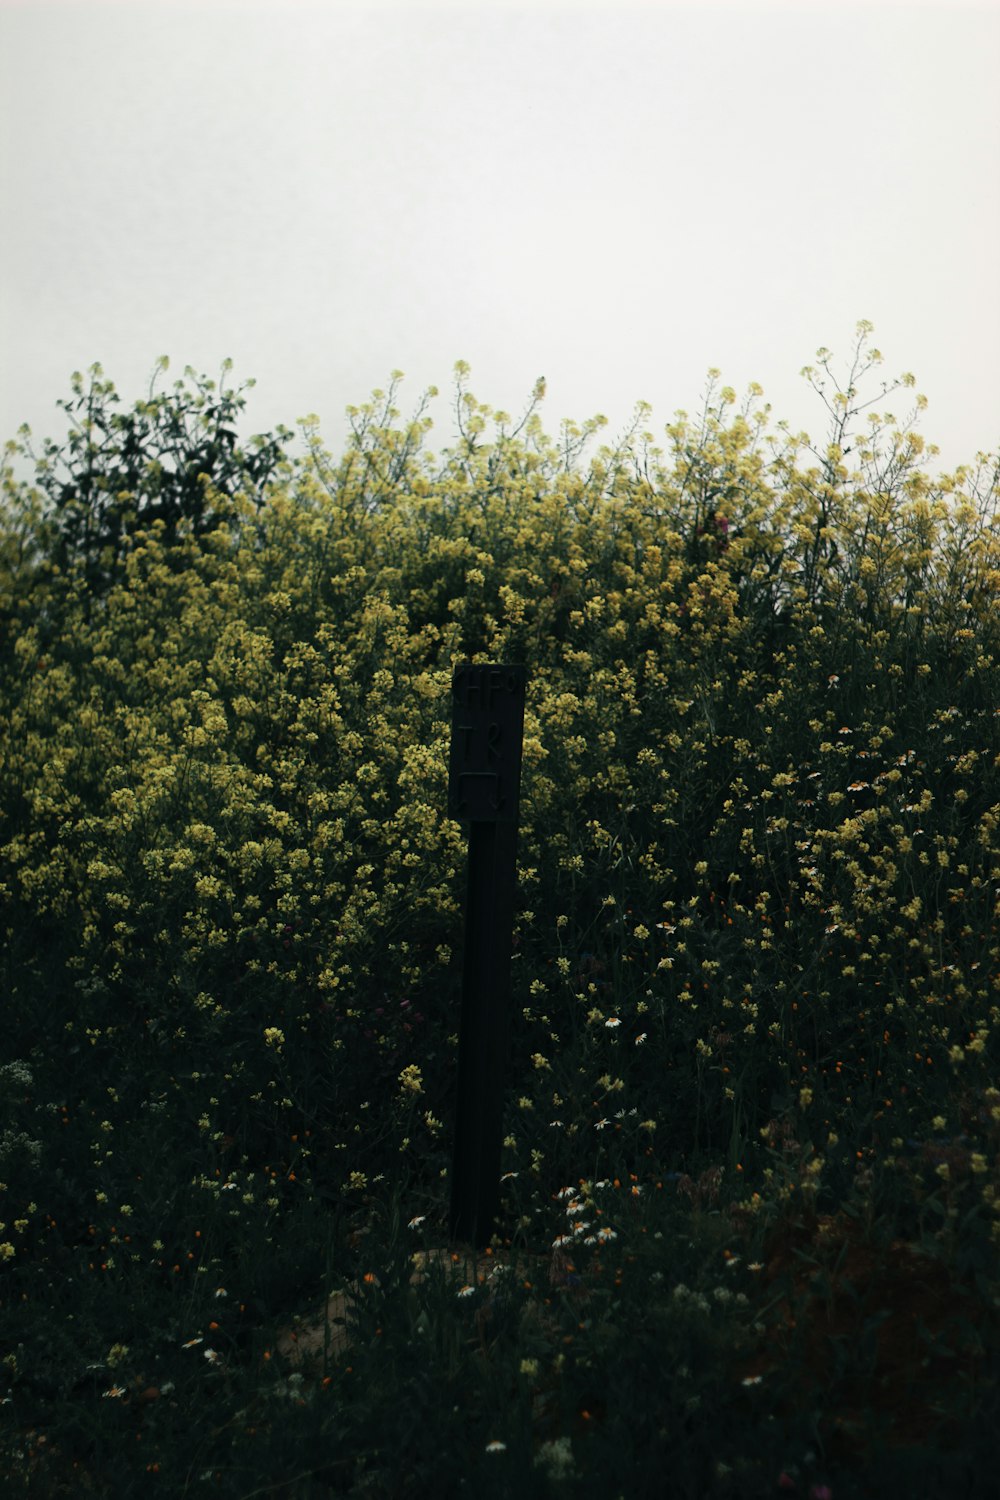 a pole in a field of yellow flowers